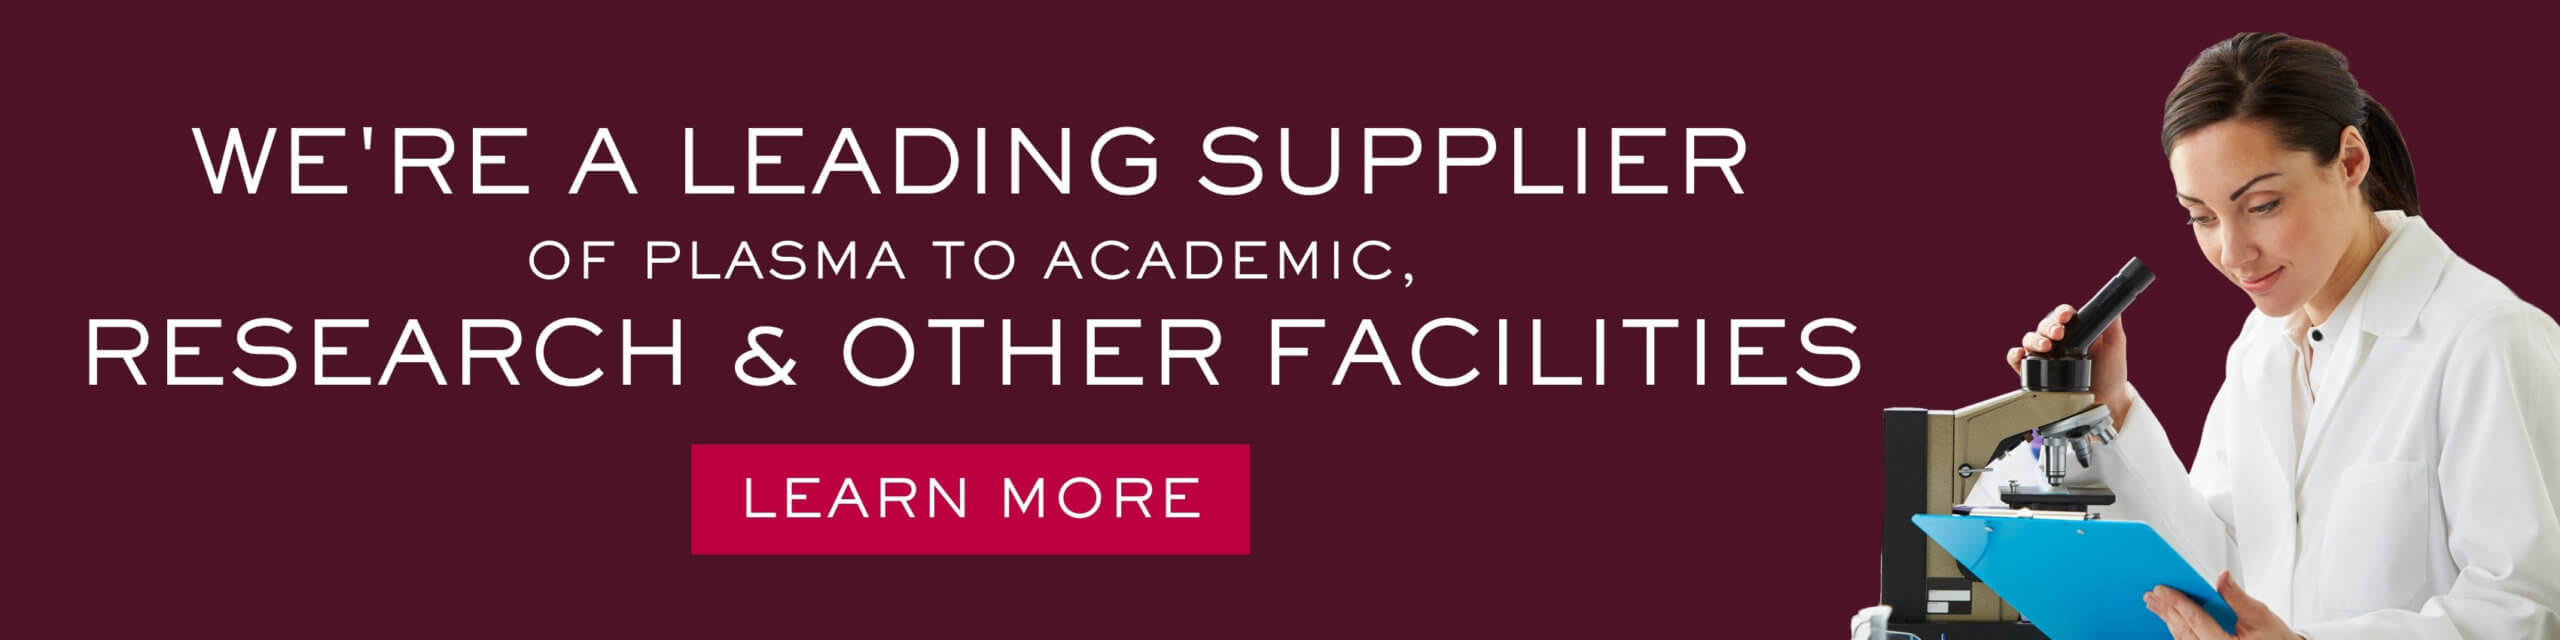 Leading supplier of plasma to academic and research facilities